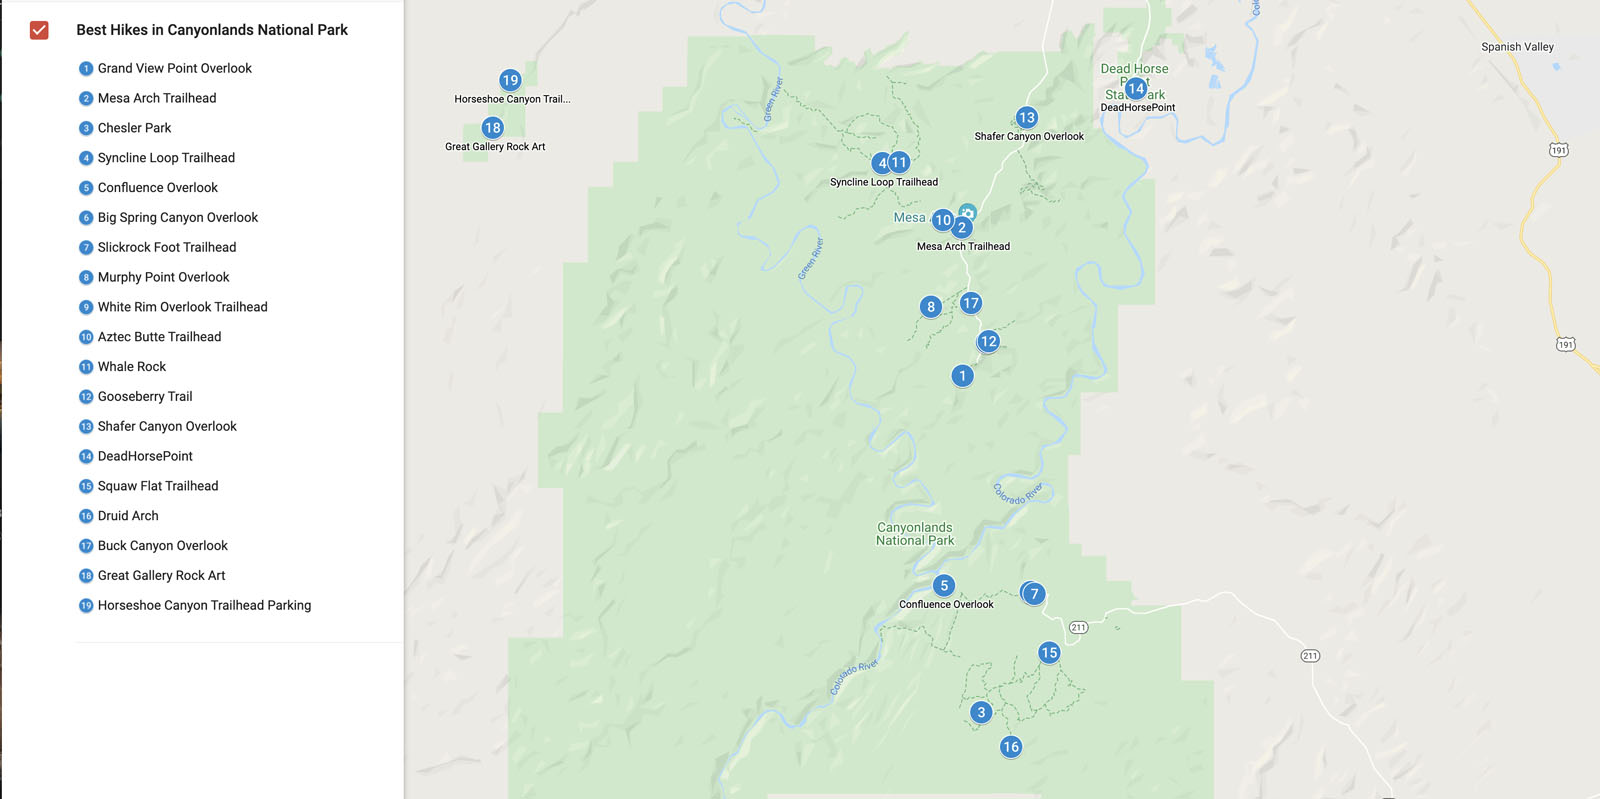 best hikes in canyonlands national park map